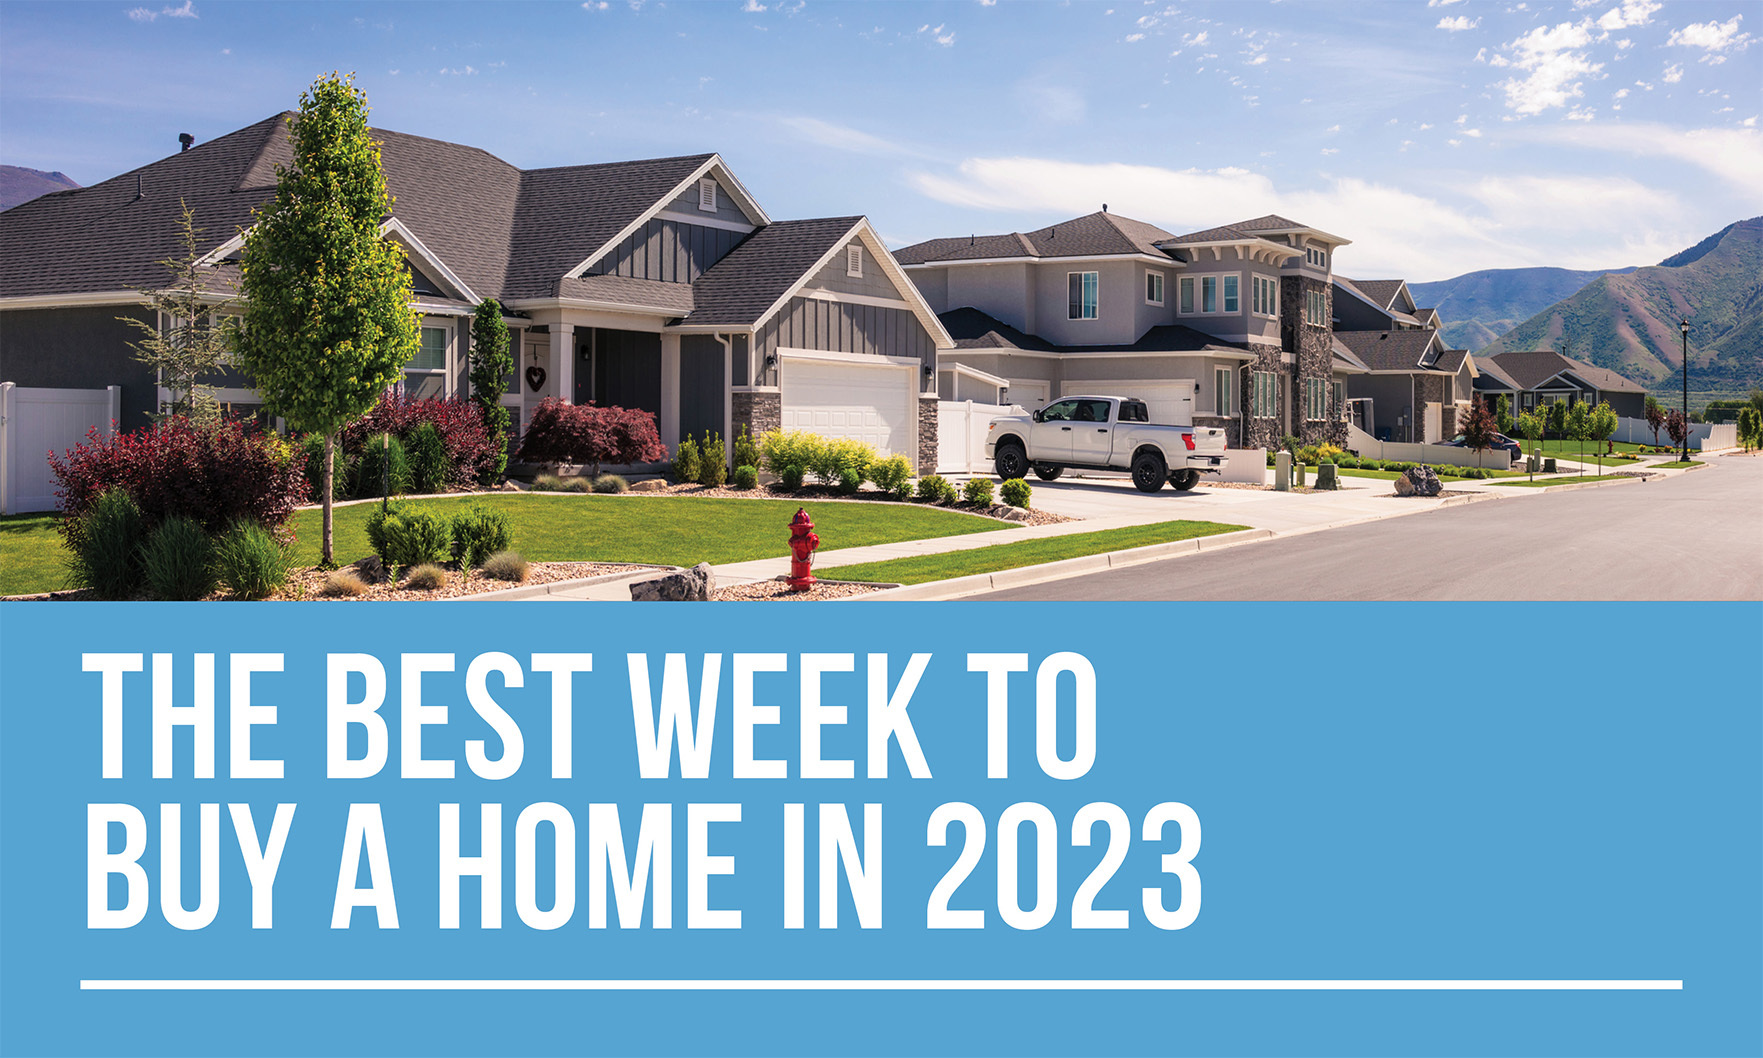 This Is the Best Week to Buy a Home In 2023, According to Realtor.com